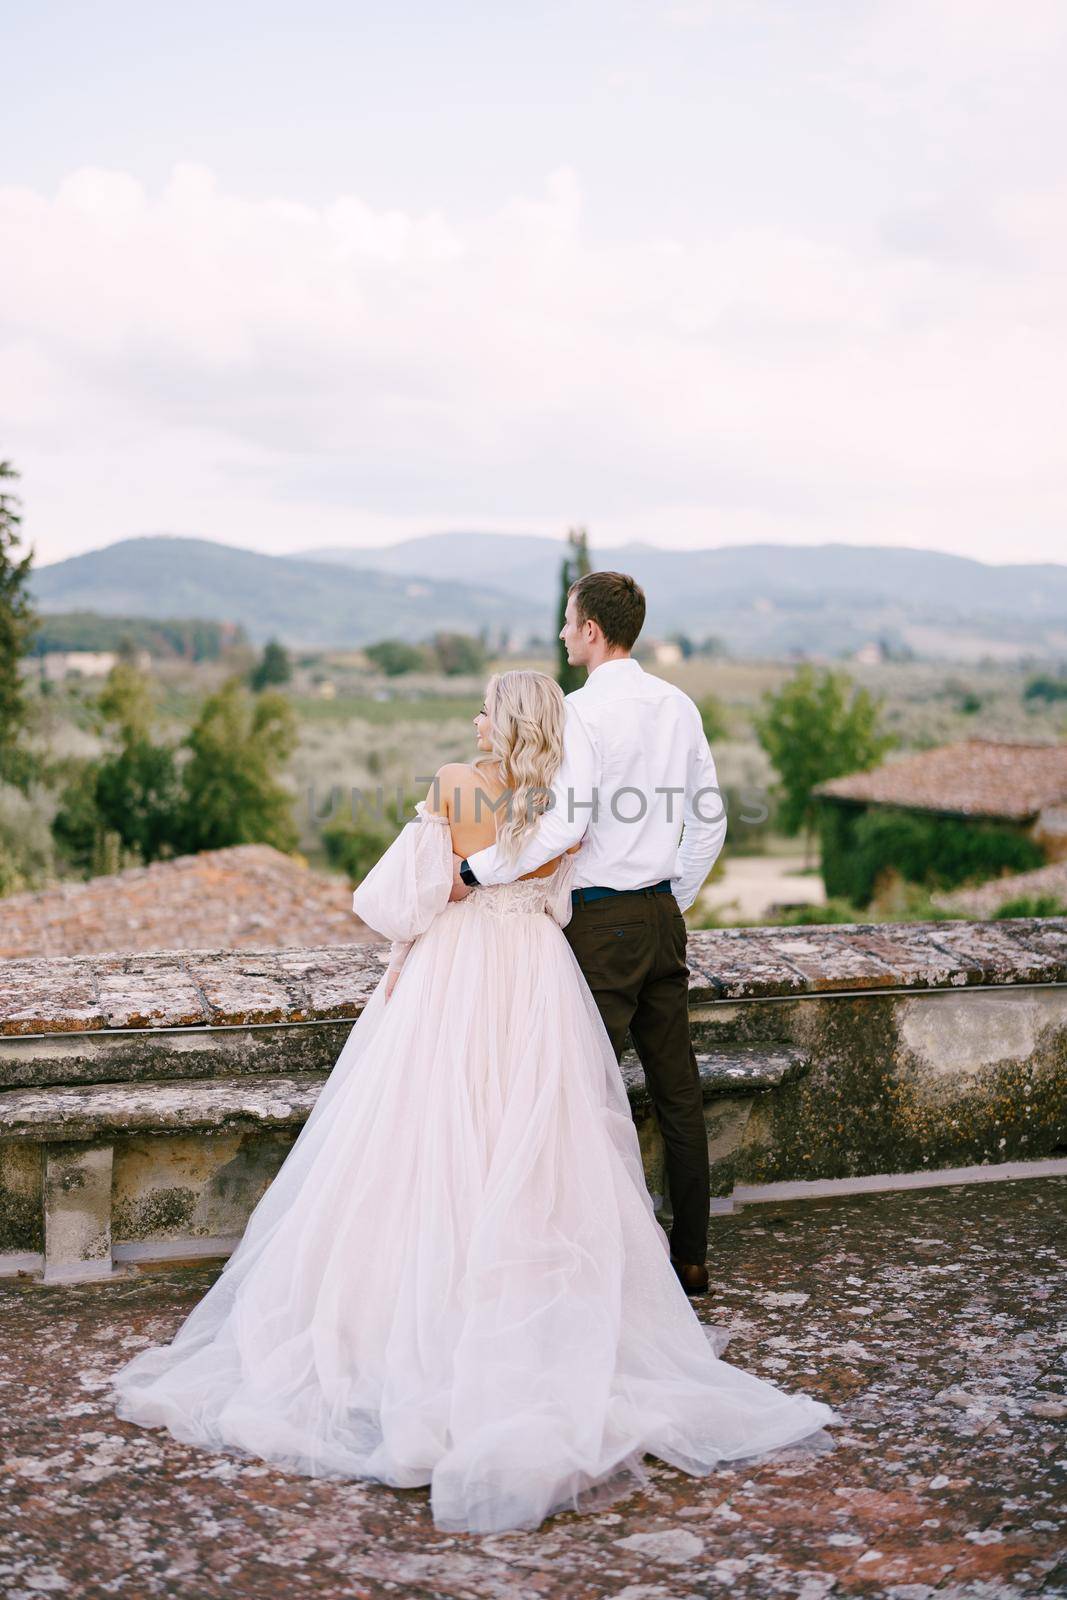 Wedding at an old winery villa in Tuscany, Italy. The wedding couple stands on the roof of an old winery, cuddling, standing with their backs in the frame.